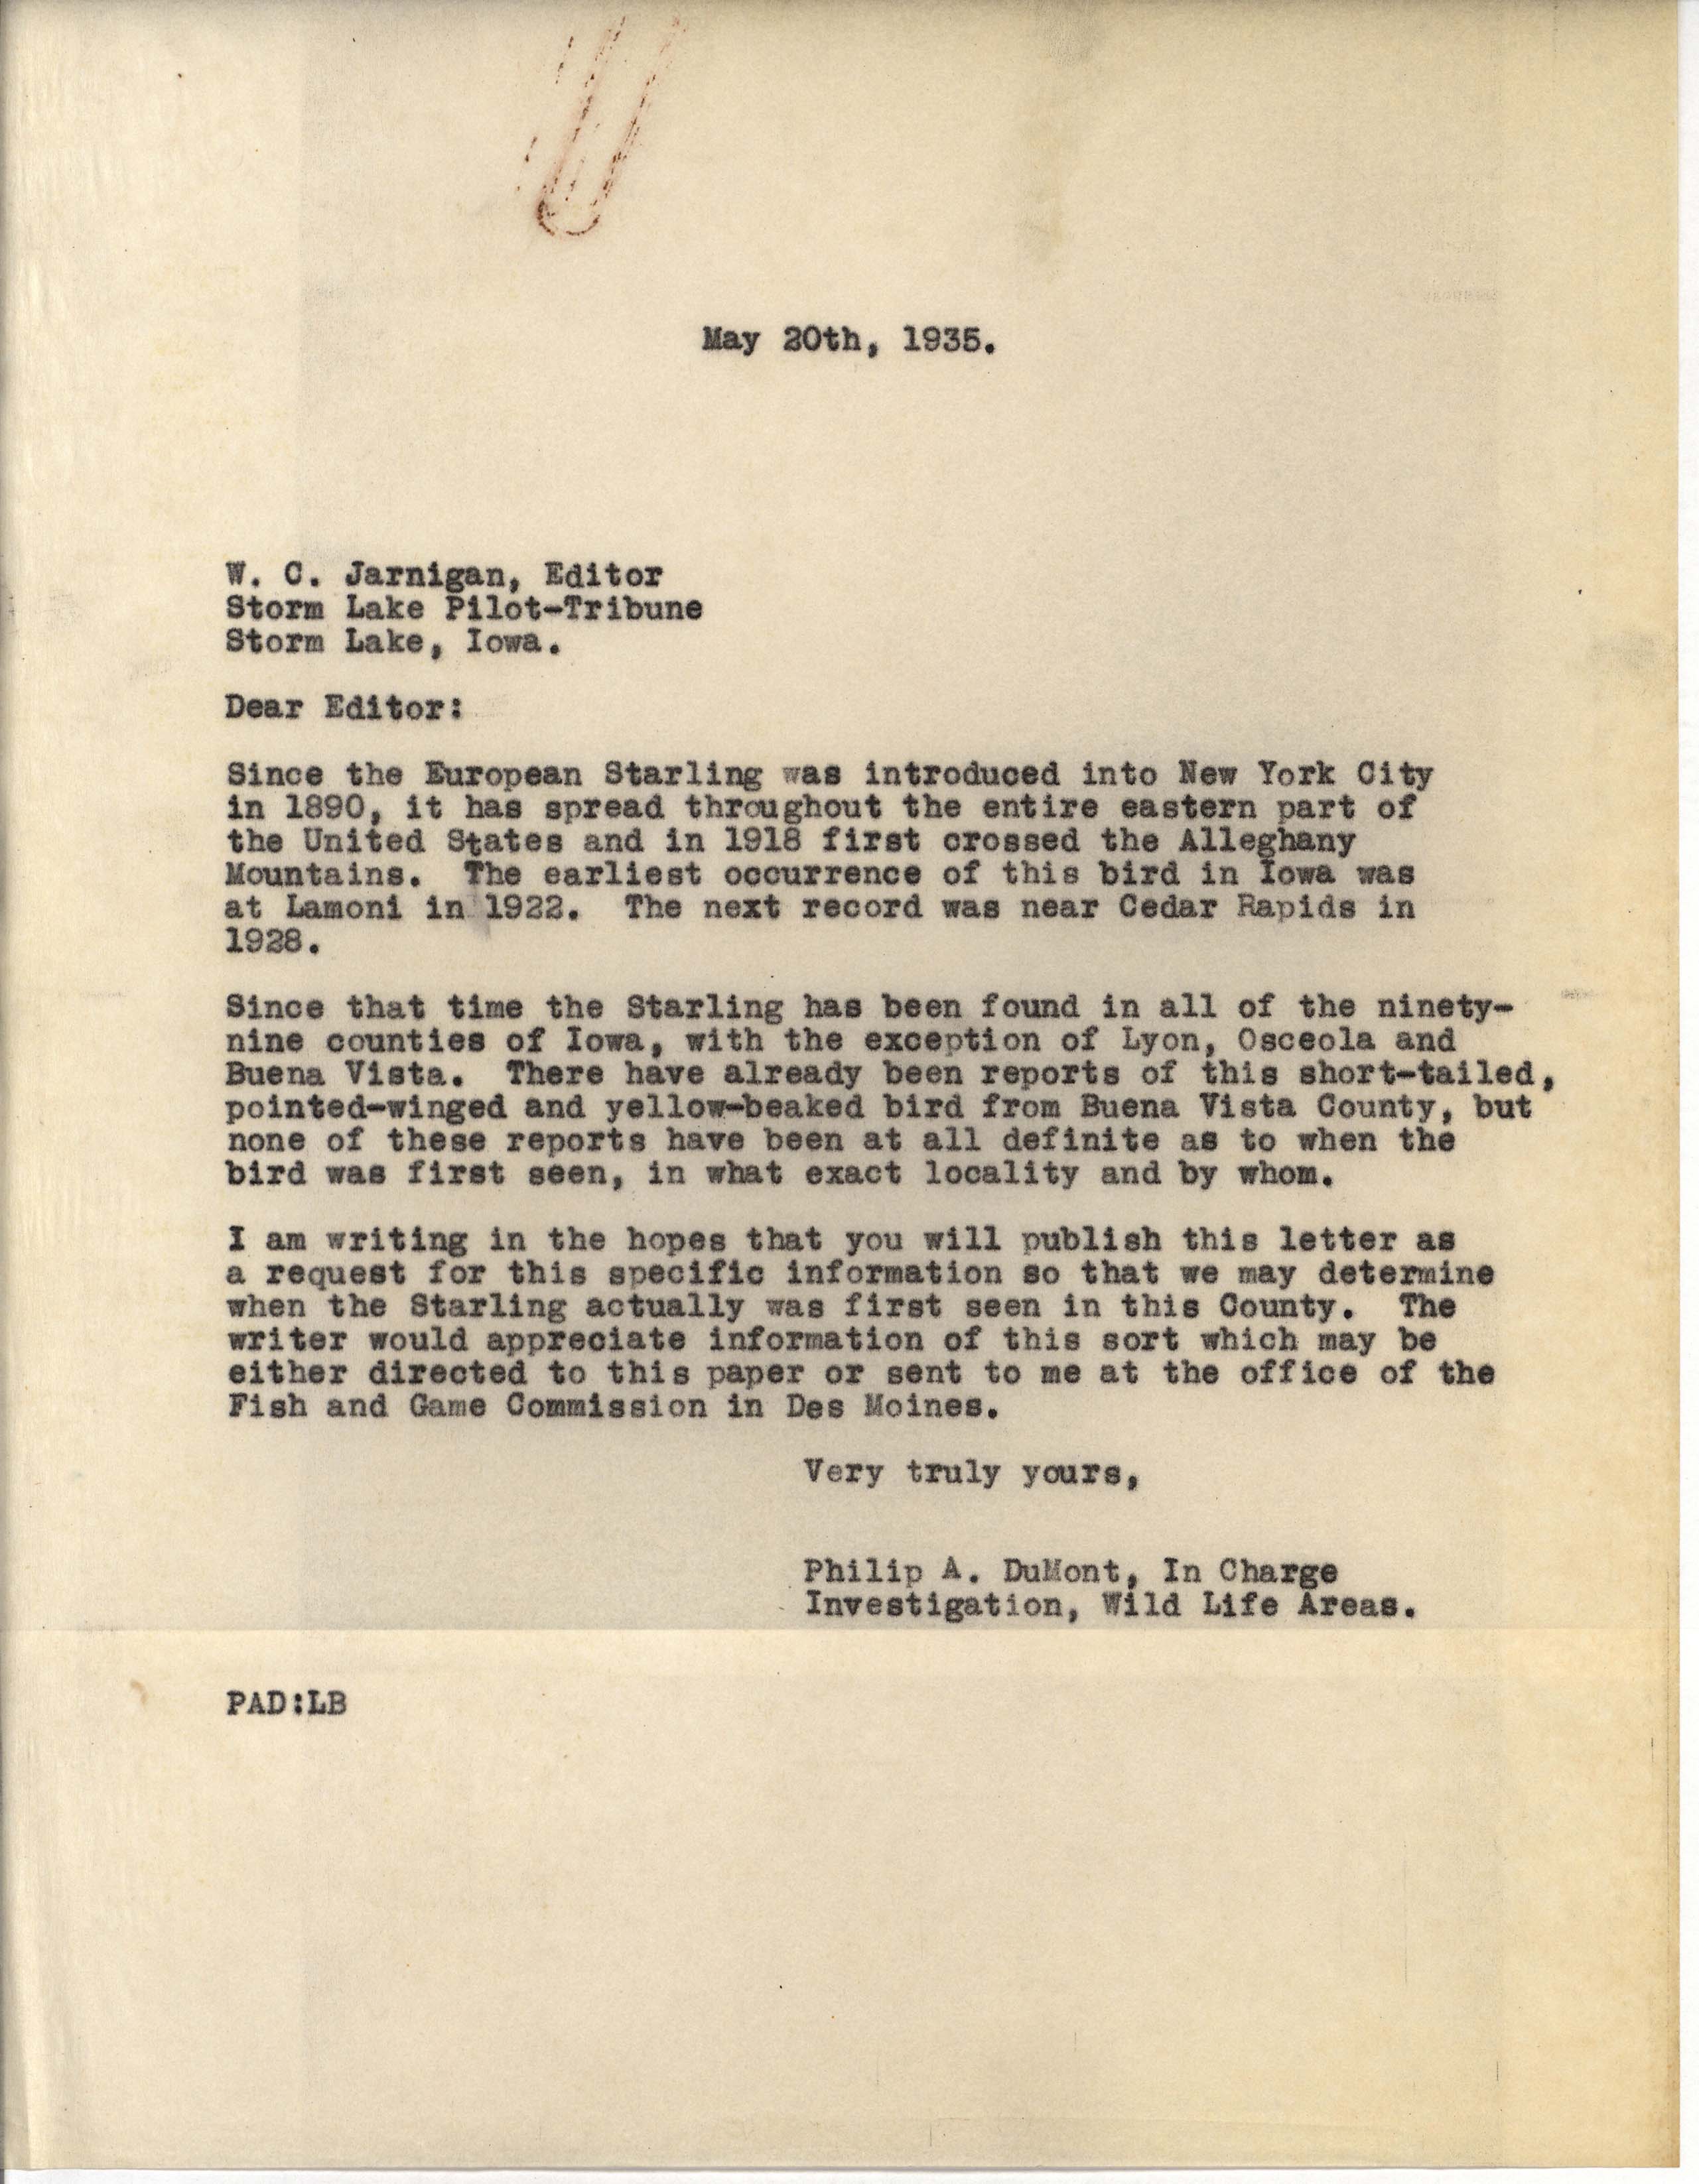 Philip DuMont letter to William Jarnagin regarding request for Starling information, May 23, 1935